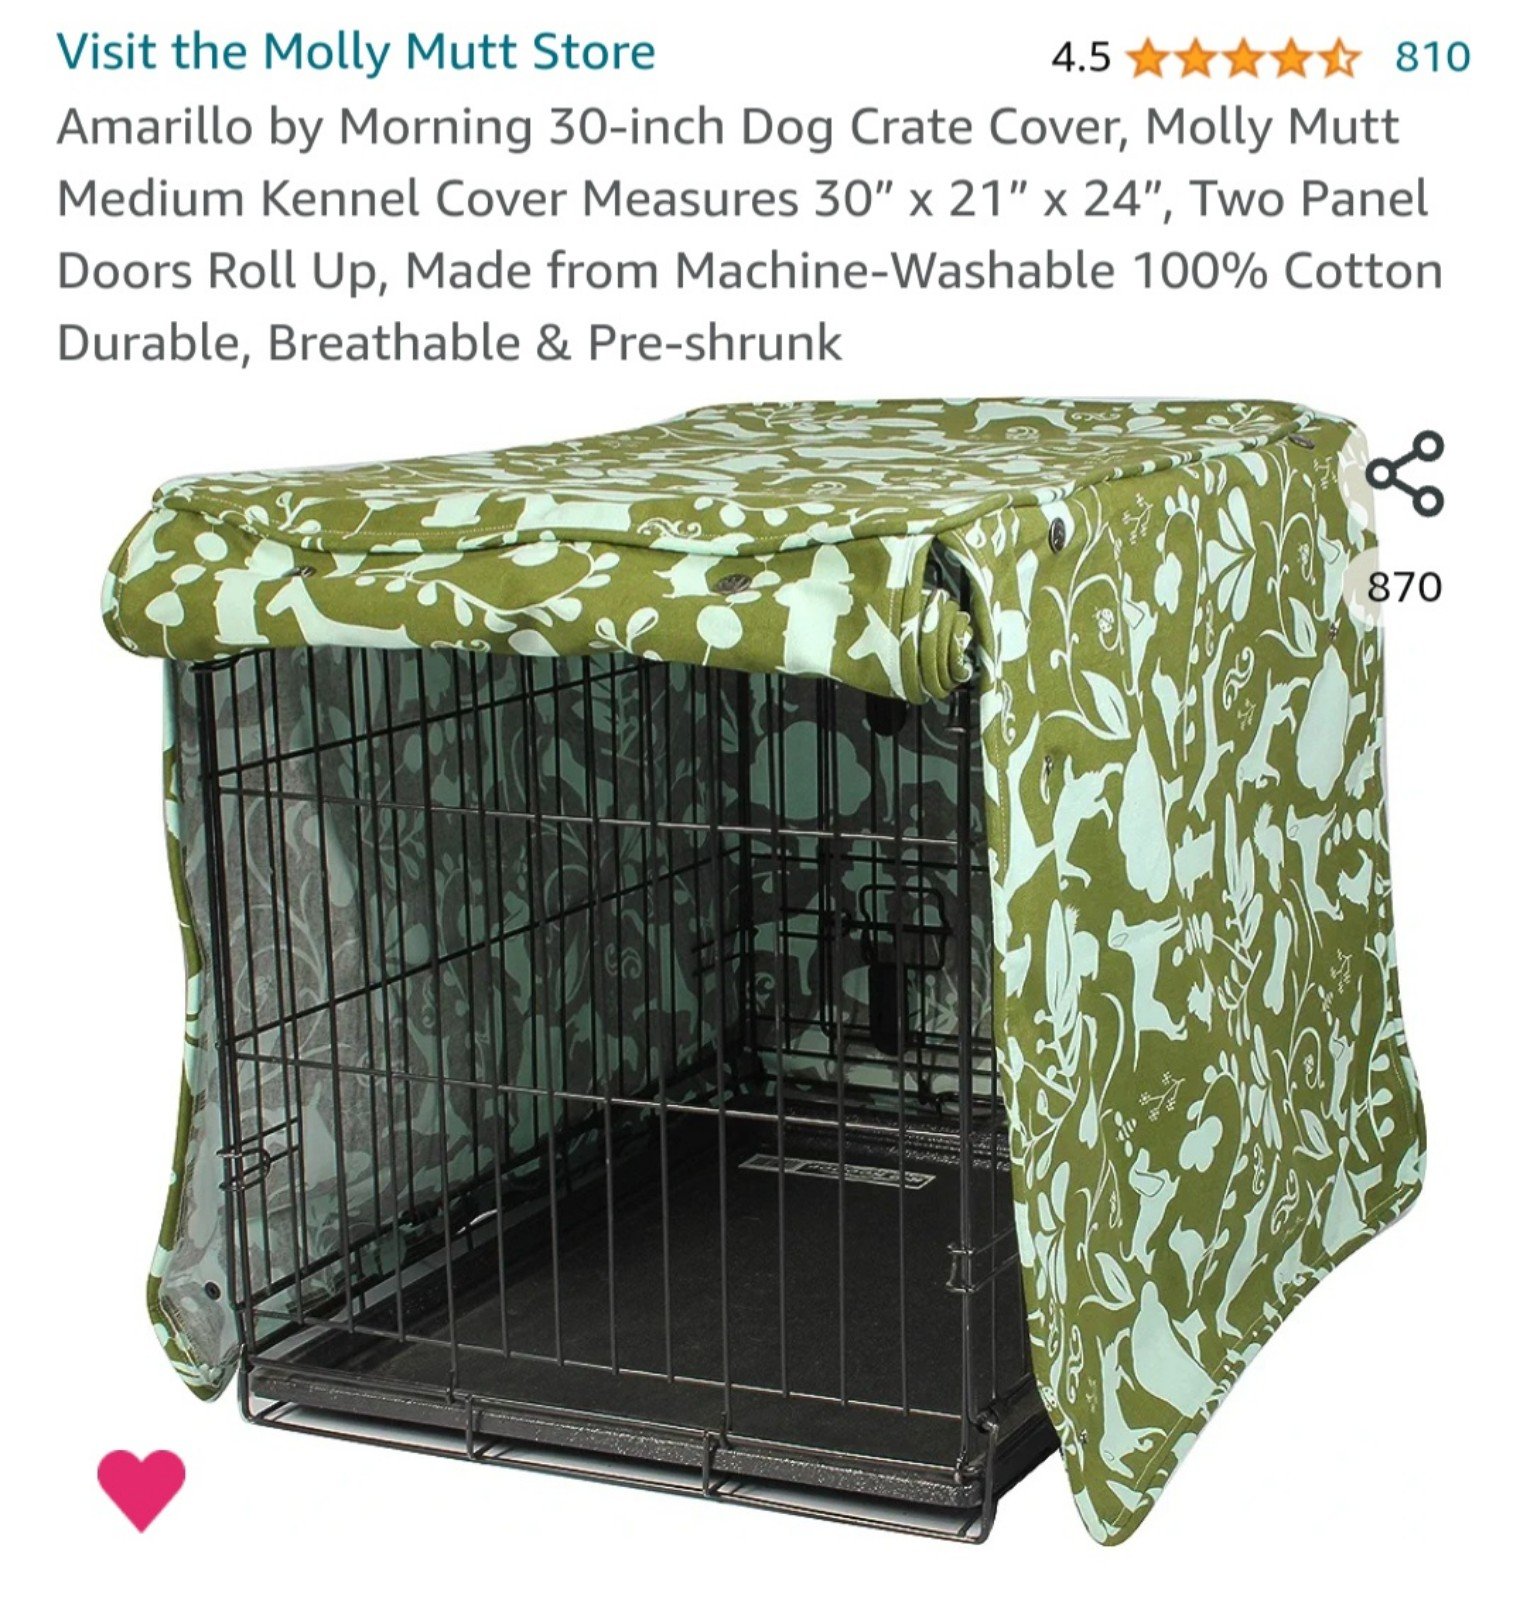 Molly Mutt Dog Crate Cover fwTuIvVO8